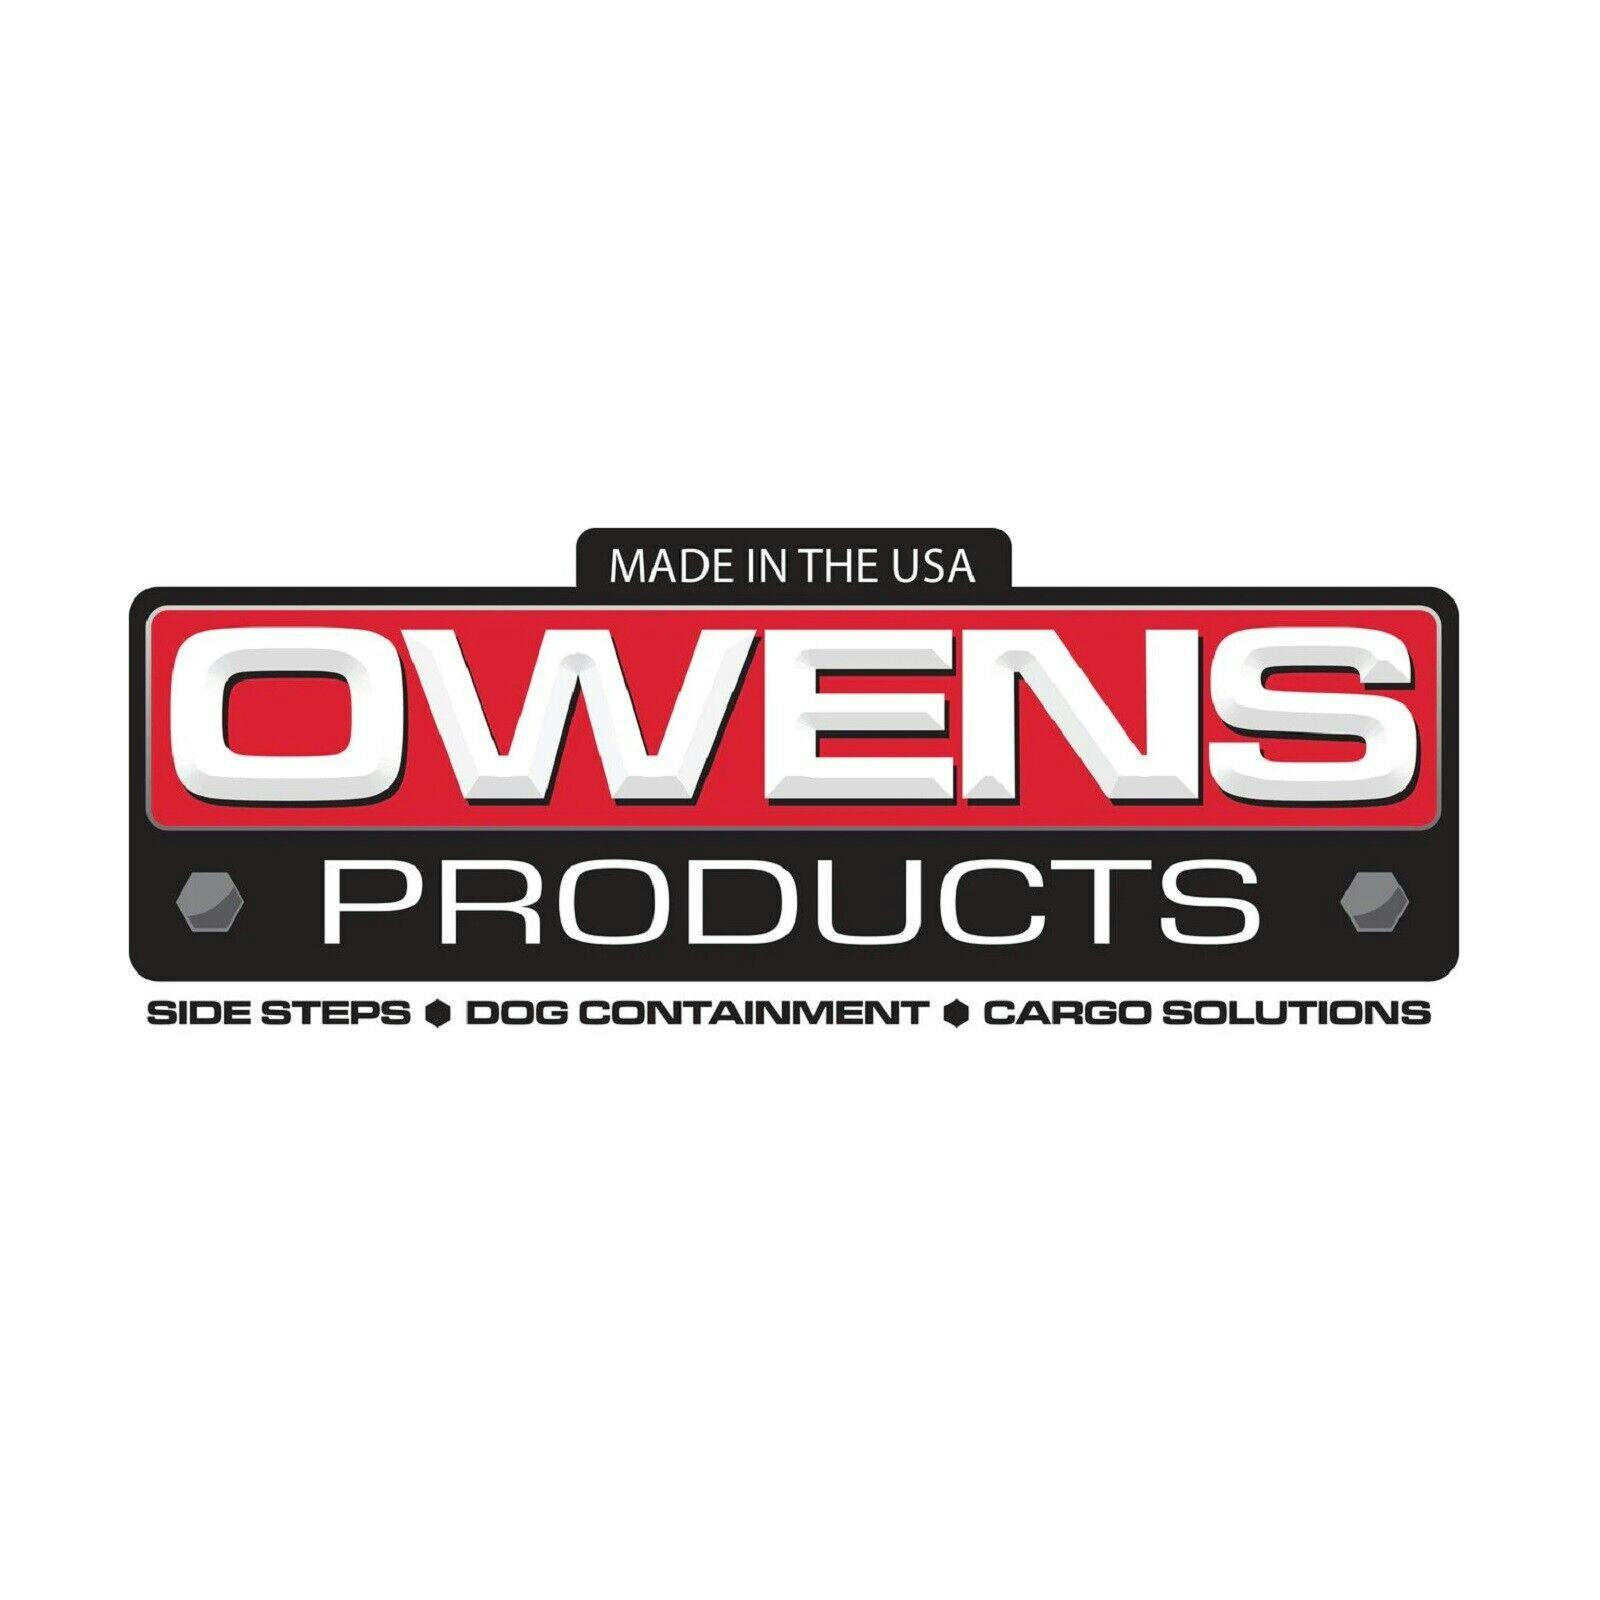 Owens Products